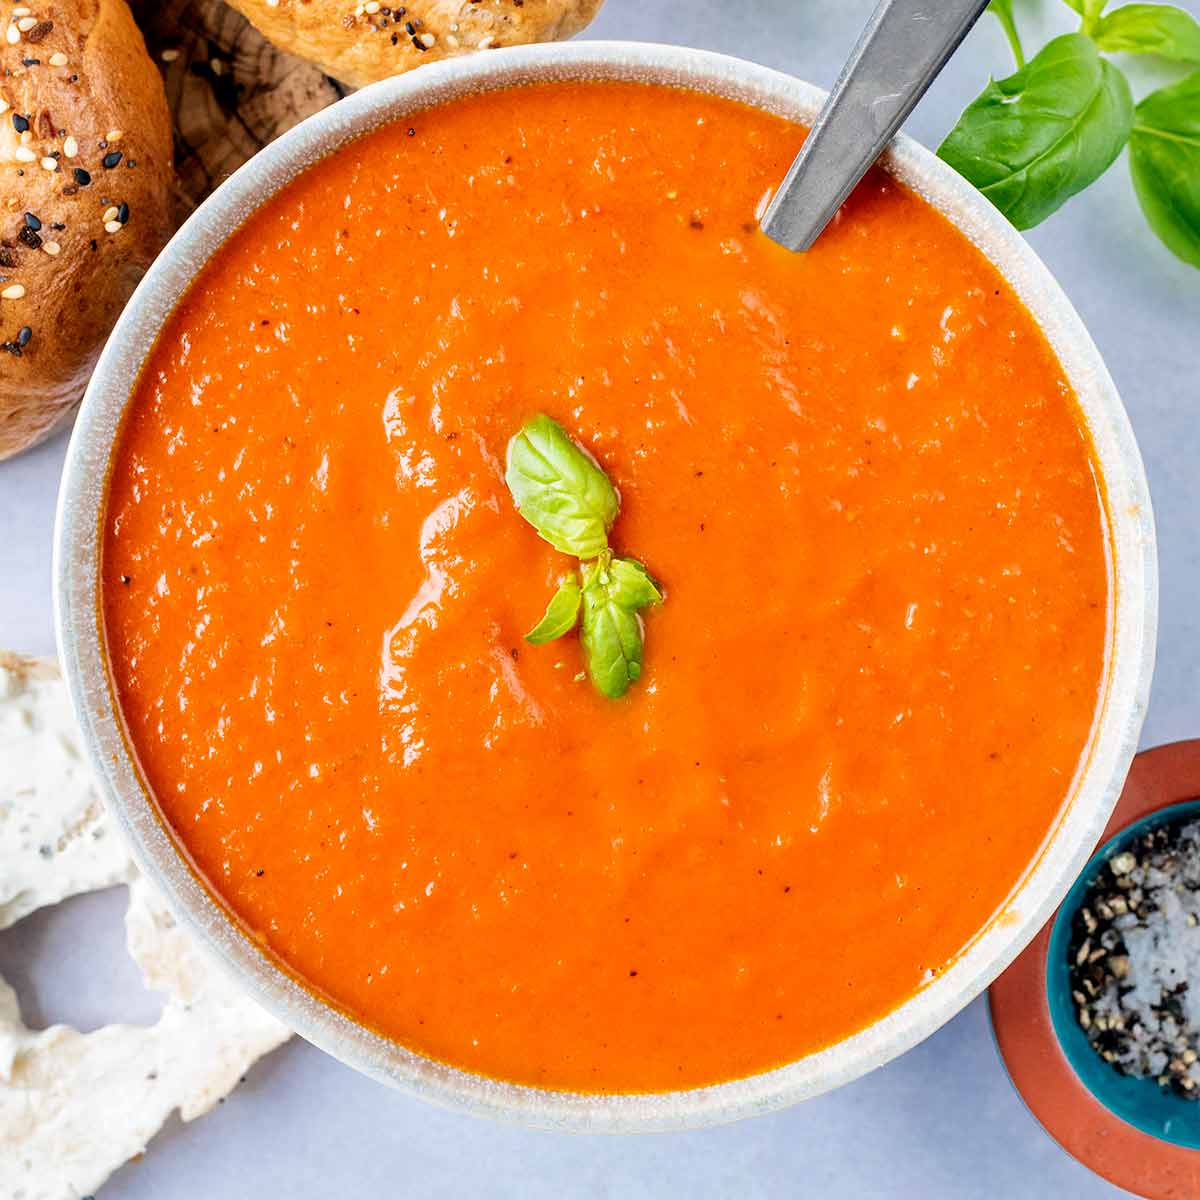 https://hungryhealthyhappy.com/wp-content/uploads/2021/09/Easy-Tomato-Soup-featured.jpg